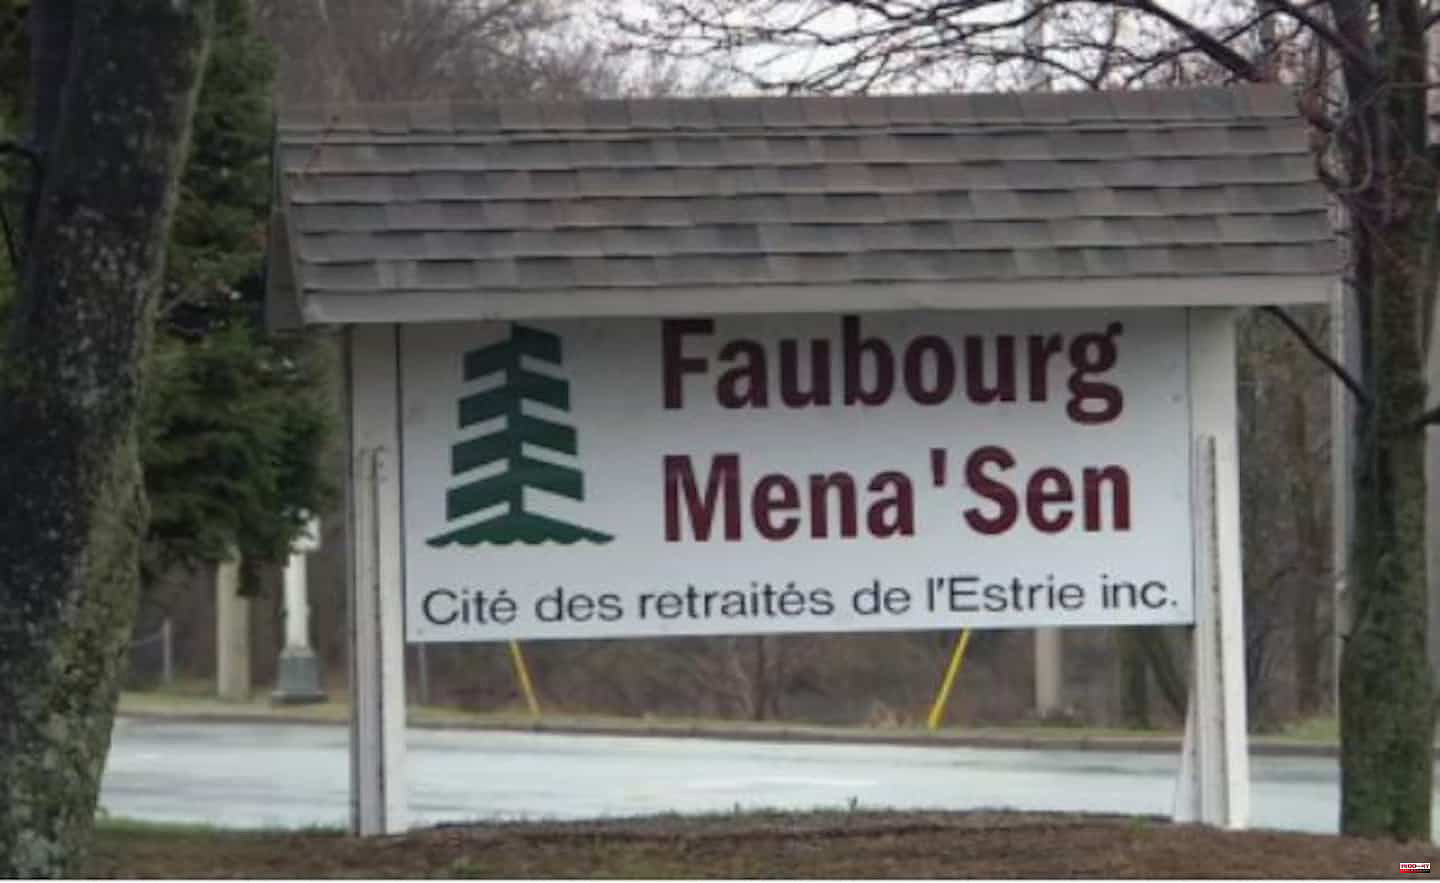 The former administrators of Faubourg Mena'sen try to explain themselves